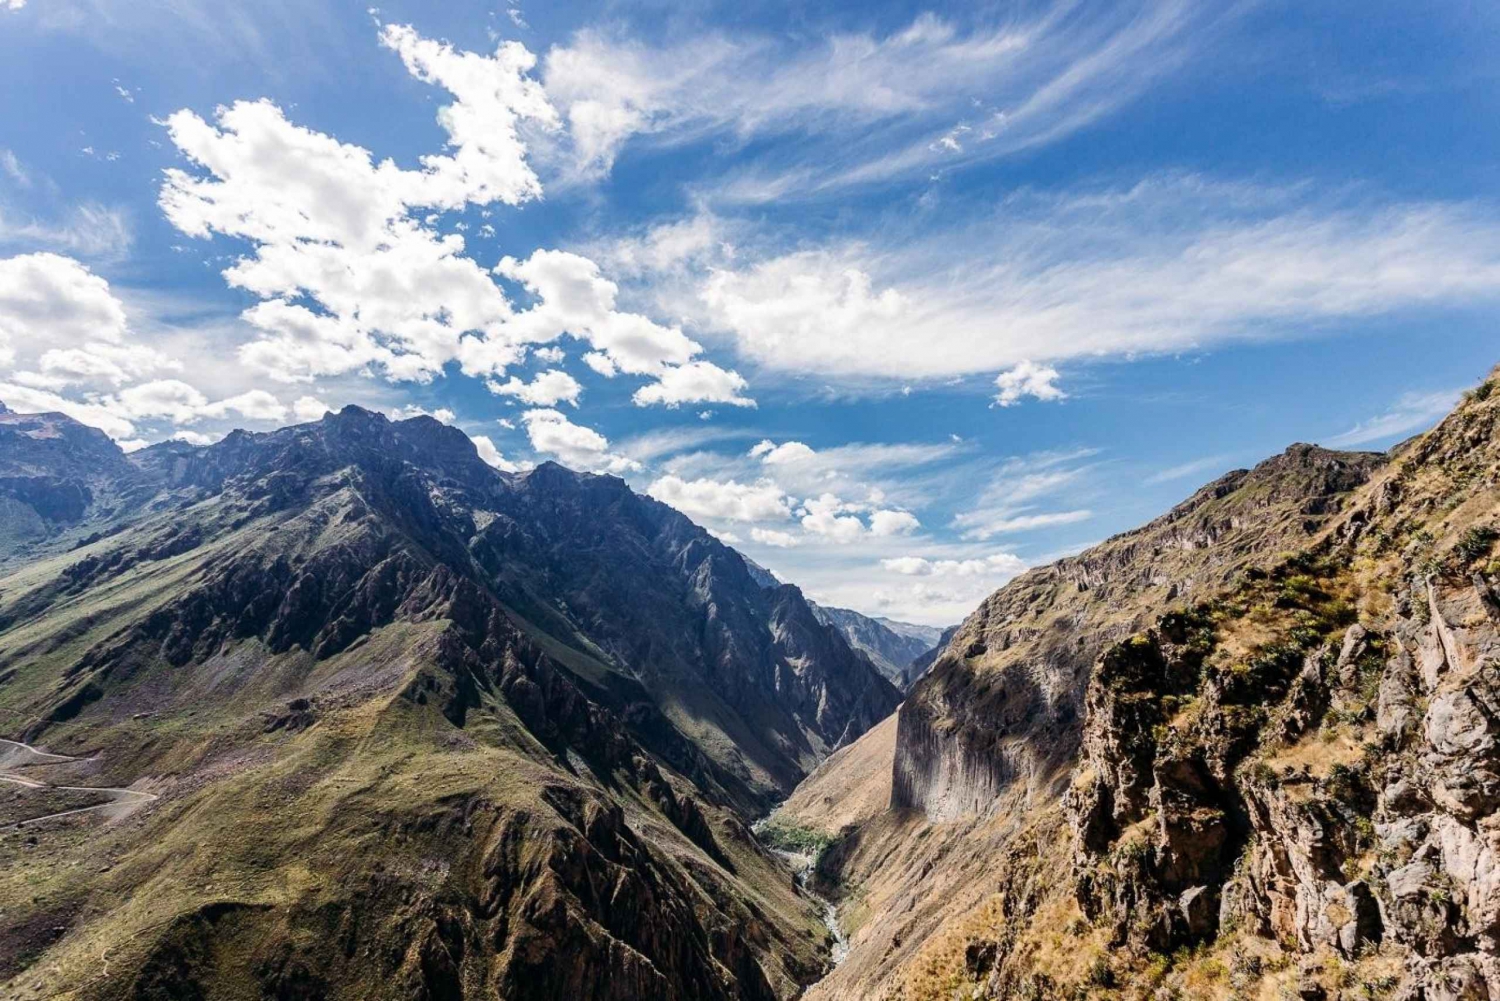 From Arequipa: 2-day trekking through the Colca Valley